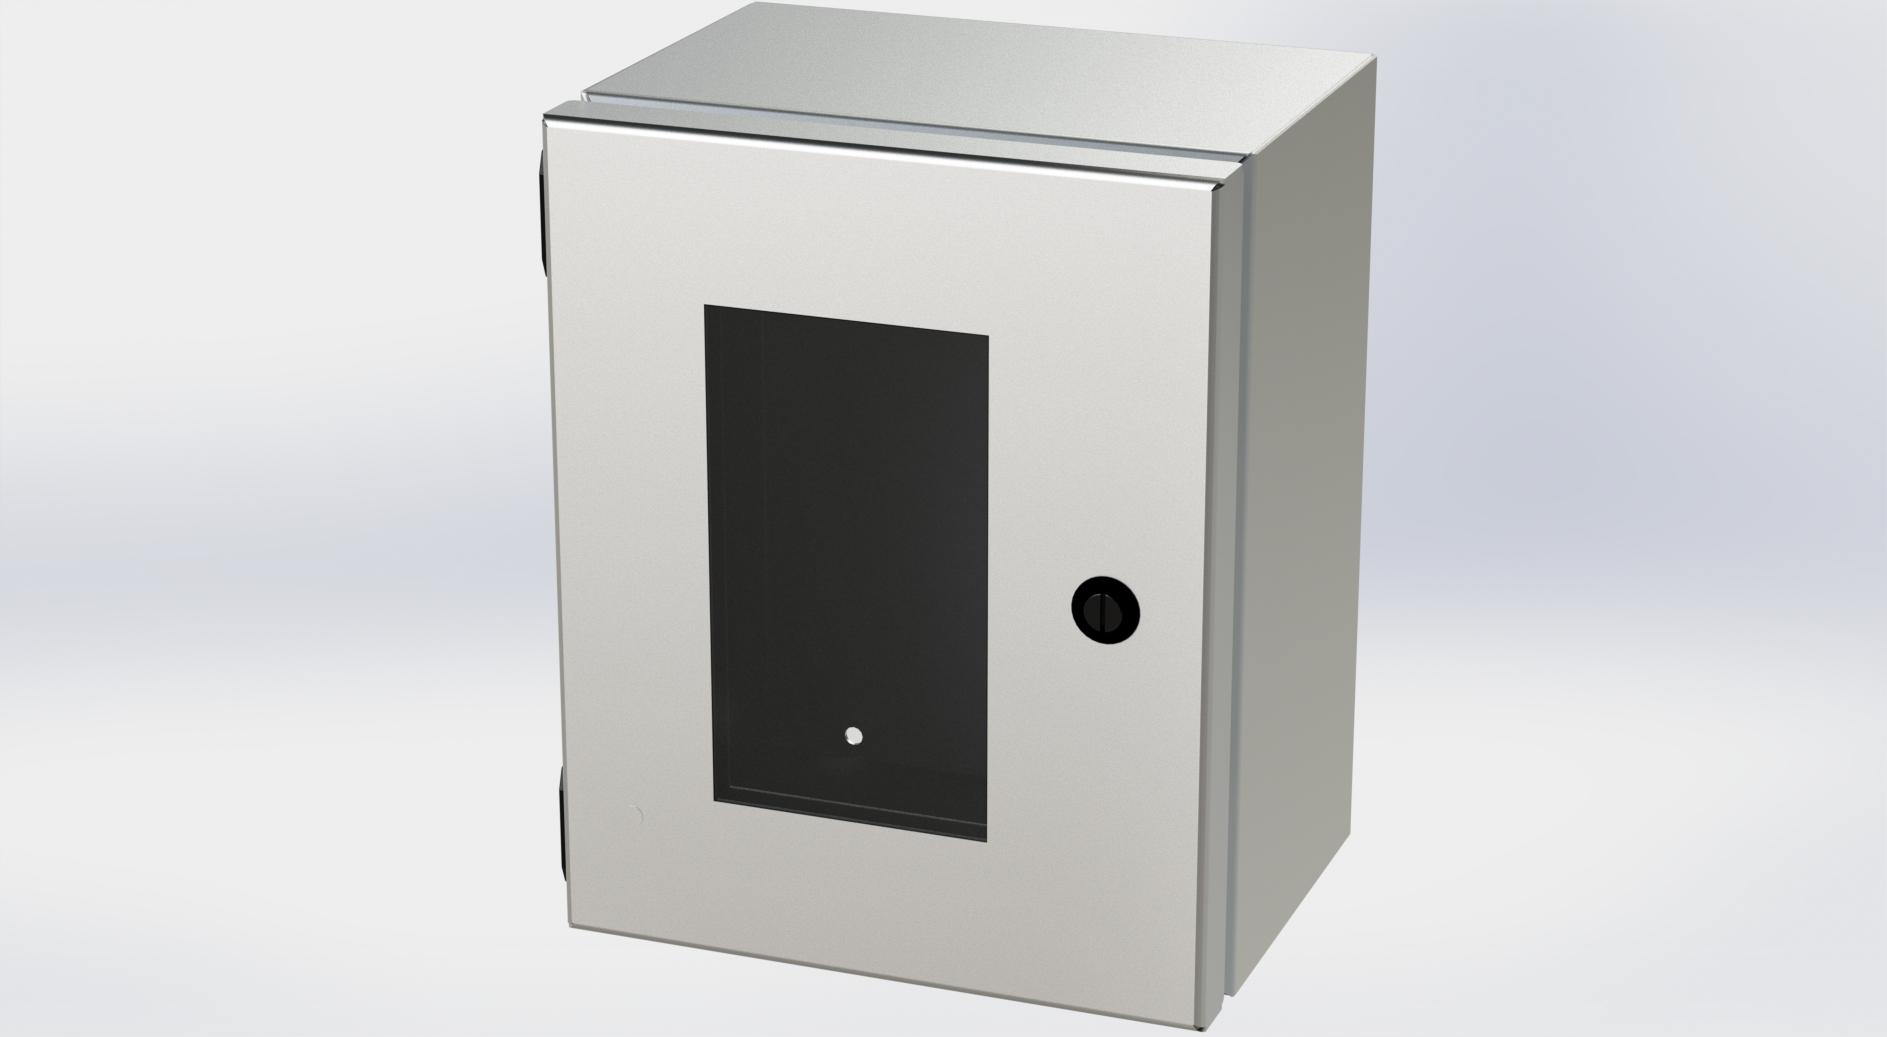 Saginaw Control SCE-10086ELJWSS S.S. ELJ Enclosure W/Viewing Window, Height:10.00", Width:8.00", Depth:6.00", #4 brushed finish on all exterior surfaces. Optional sub-panels are powder coated white.